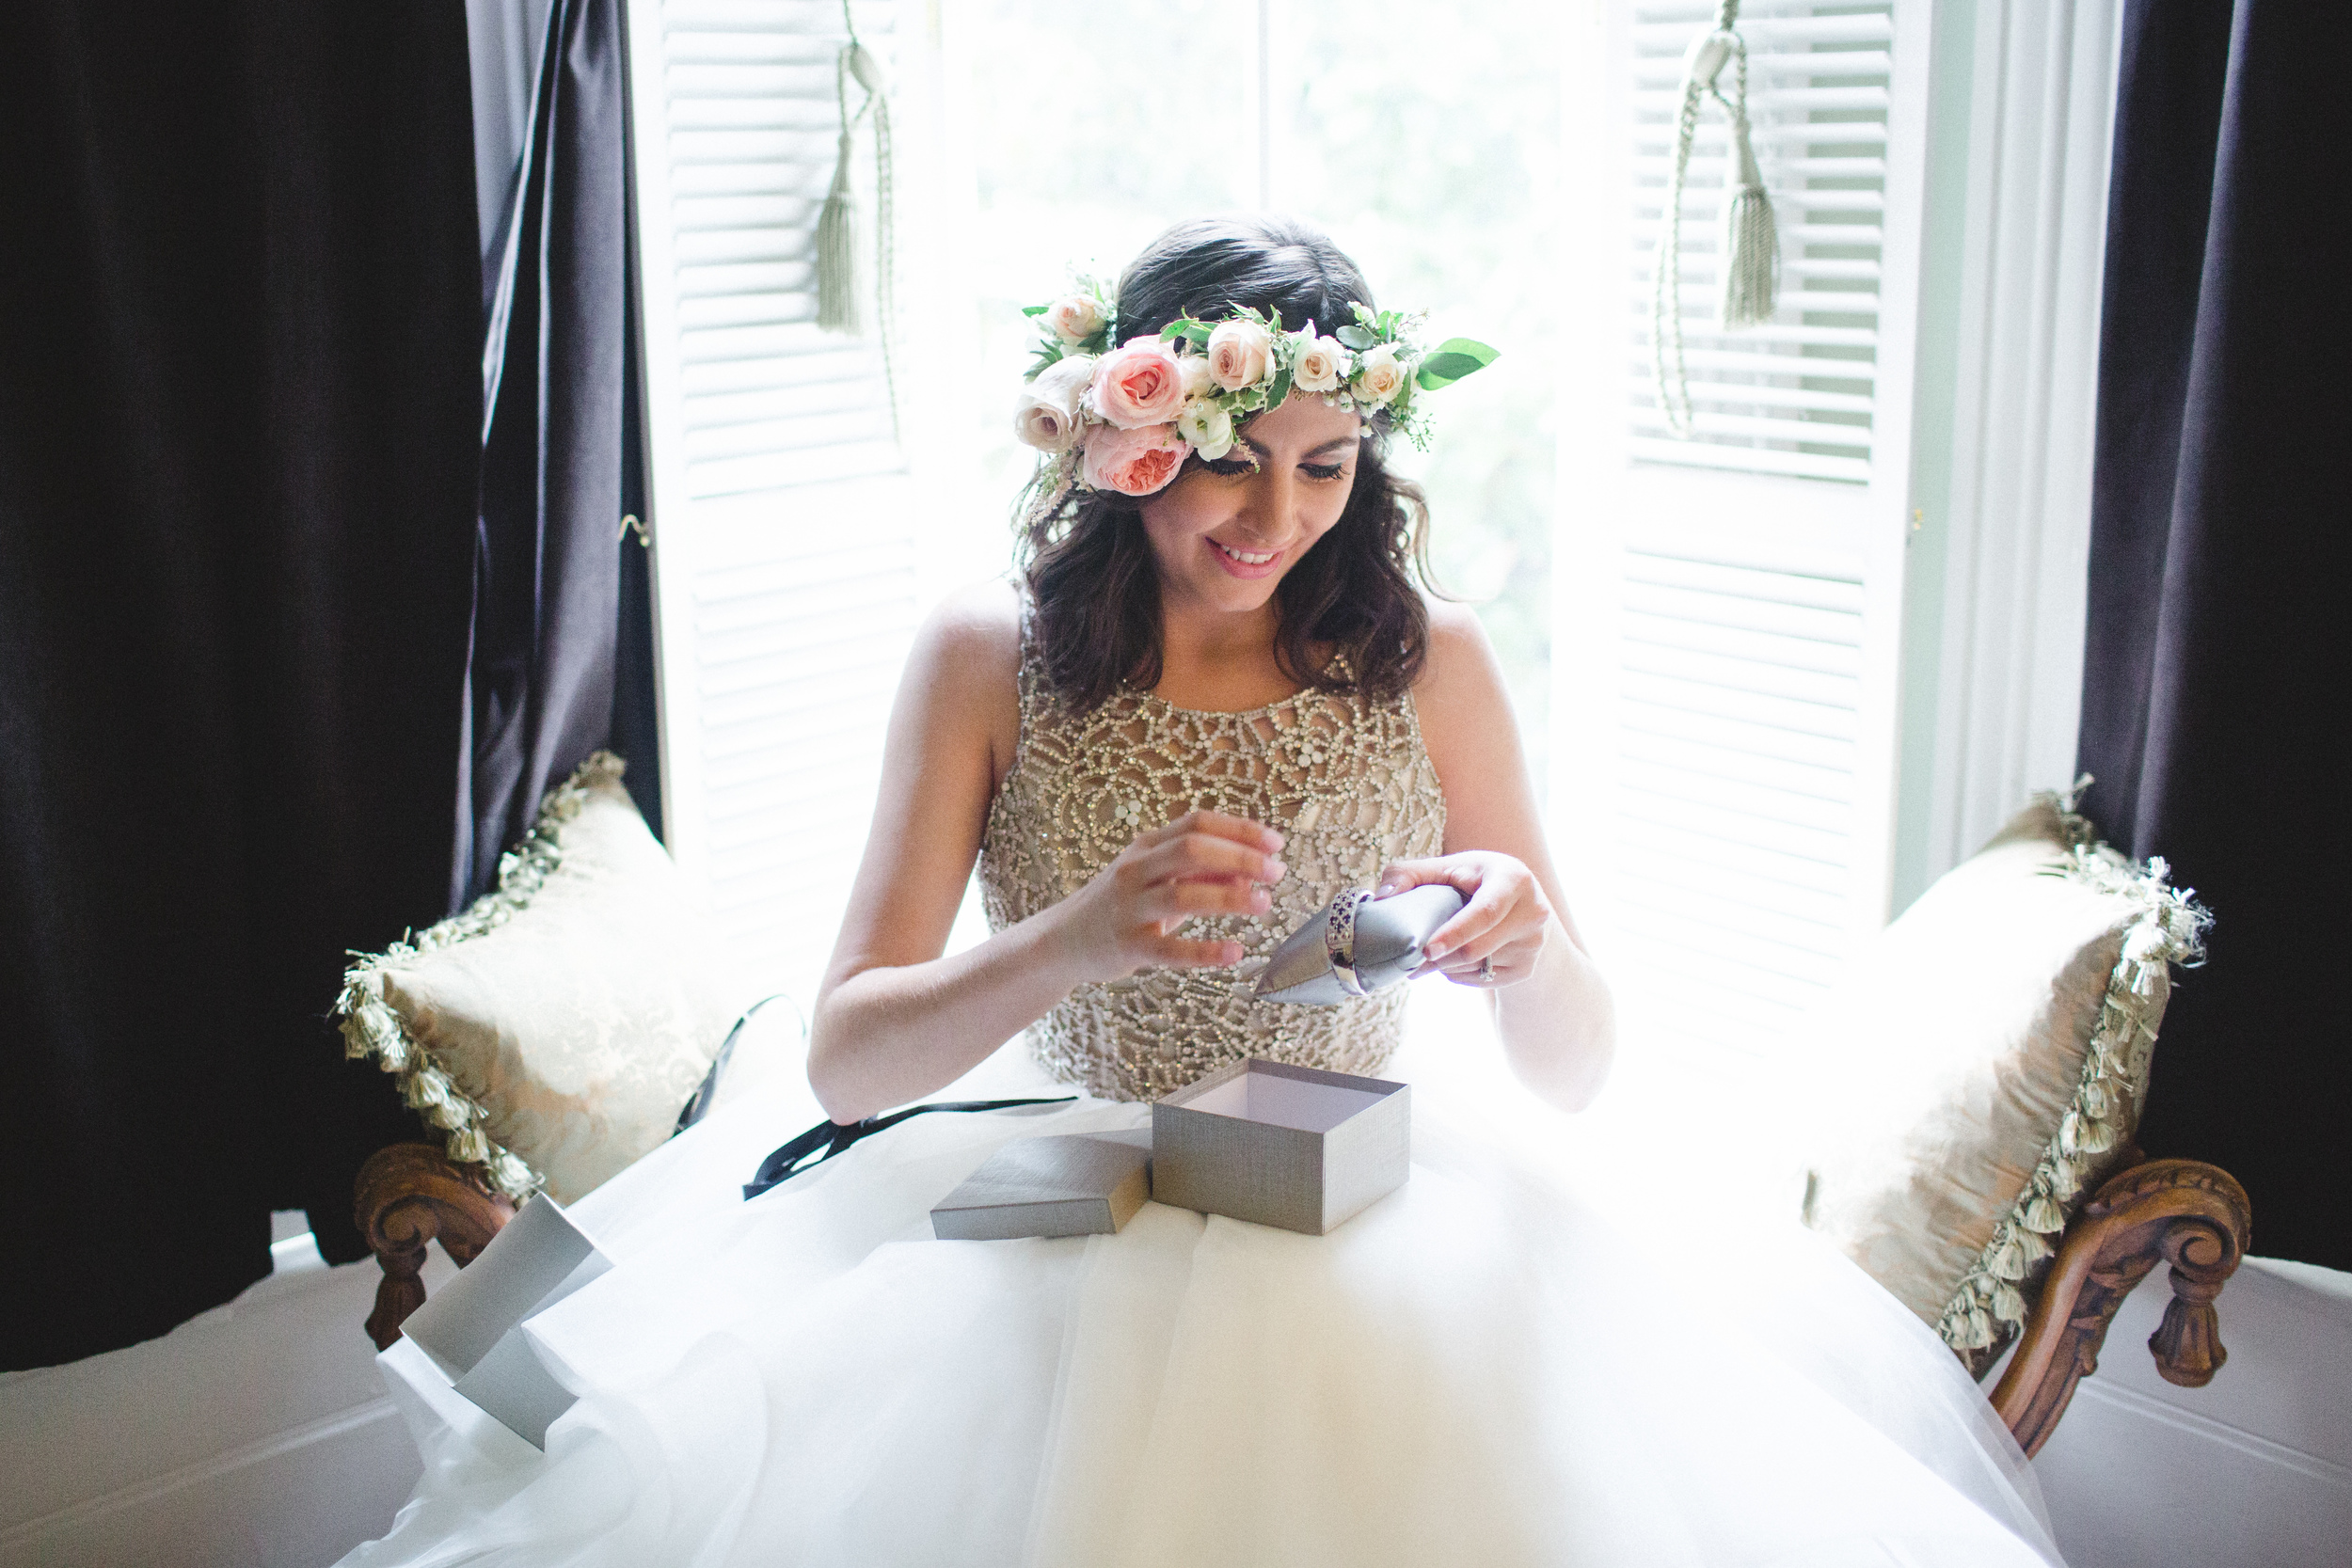 daniela-and-pedro-wedding-izzy-hudgins-photography-a-to-zinnias-whitfield-square-charles-h-morris-center-wedding-ivoyy-and-beau-bridal-boutique-dorie-hayley-paige-savannah-wedding-planner-savannah-bridal-boutique-savannah-weddings-9.jpg